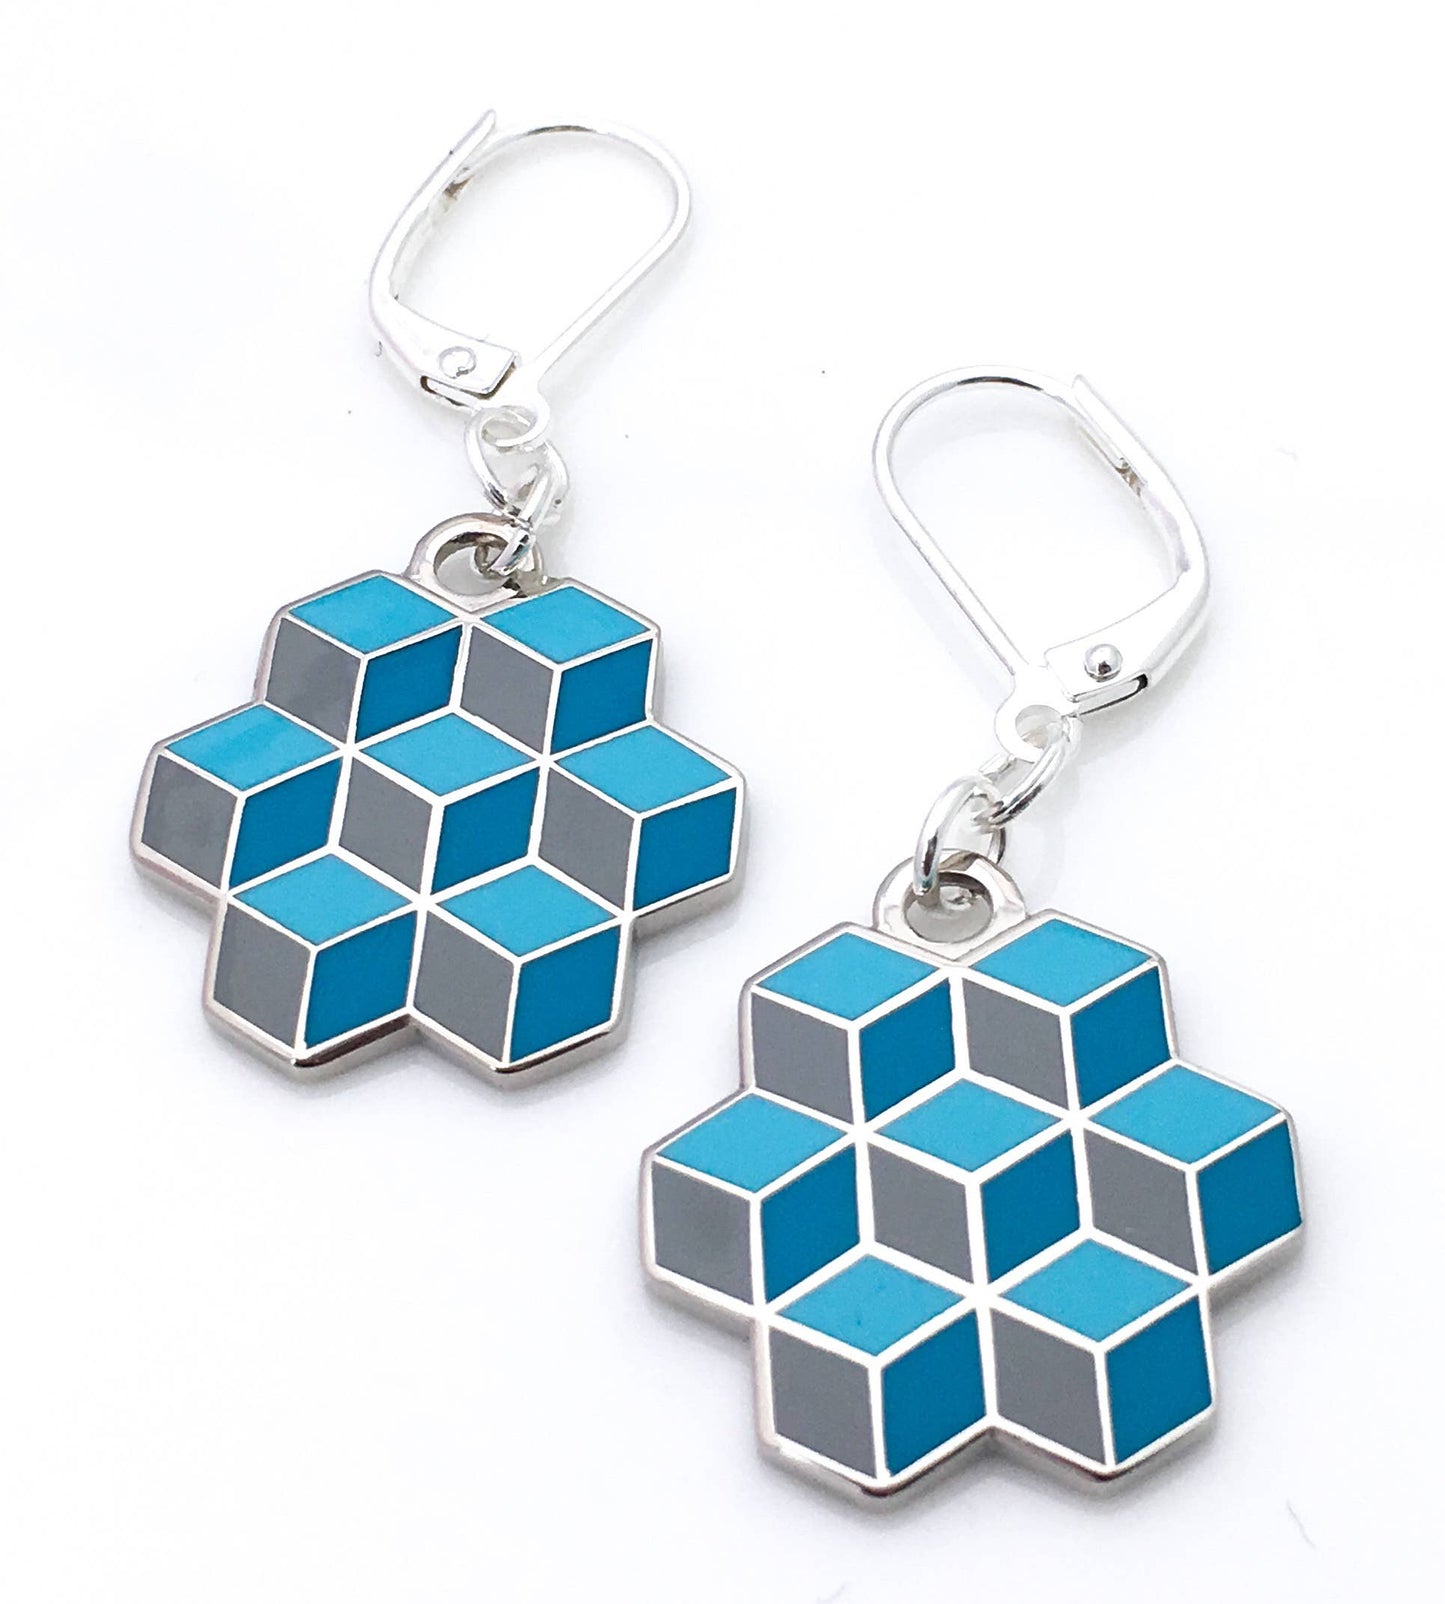 Earrings with optical illusion of stacked blue enamel cubes in an pentagon shape